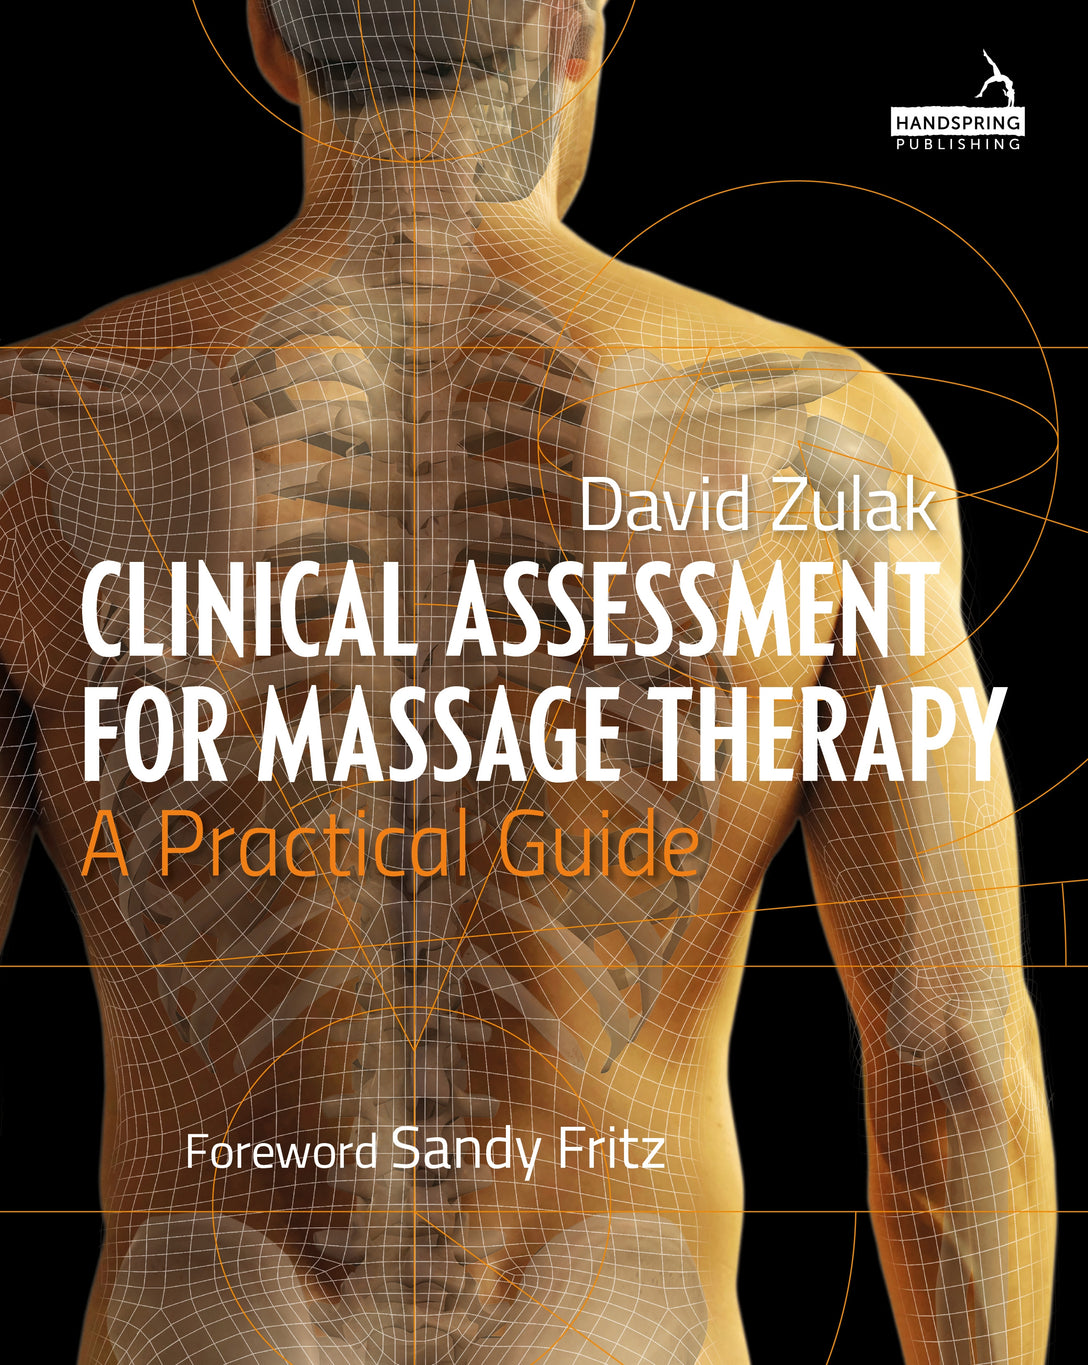 Clinical Assessment For Massage Therapy by David Zulak